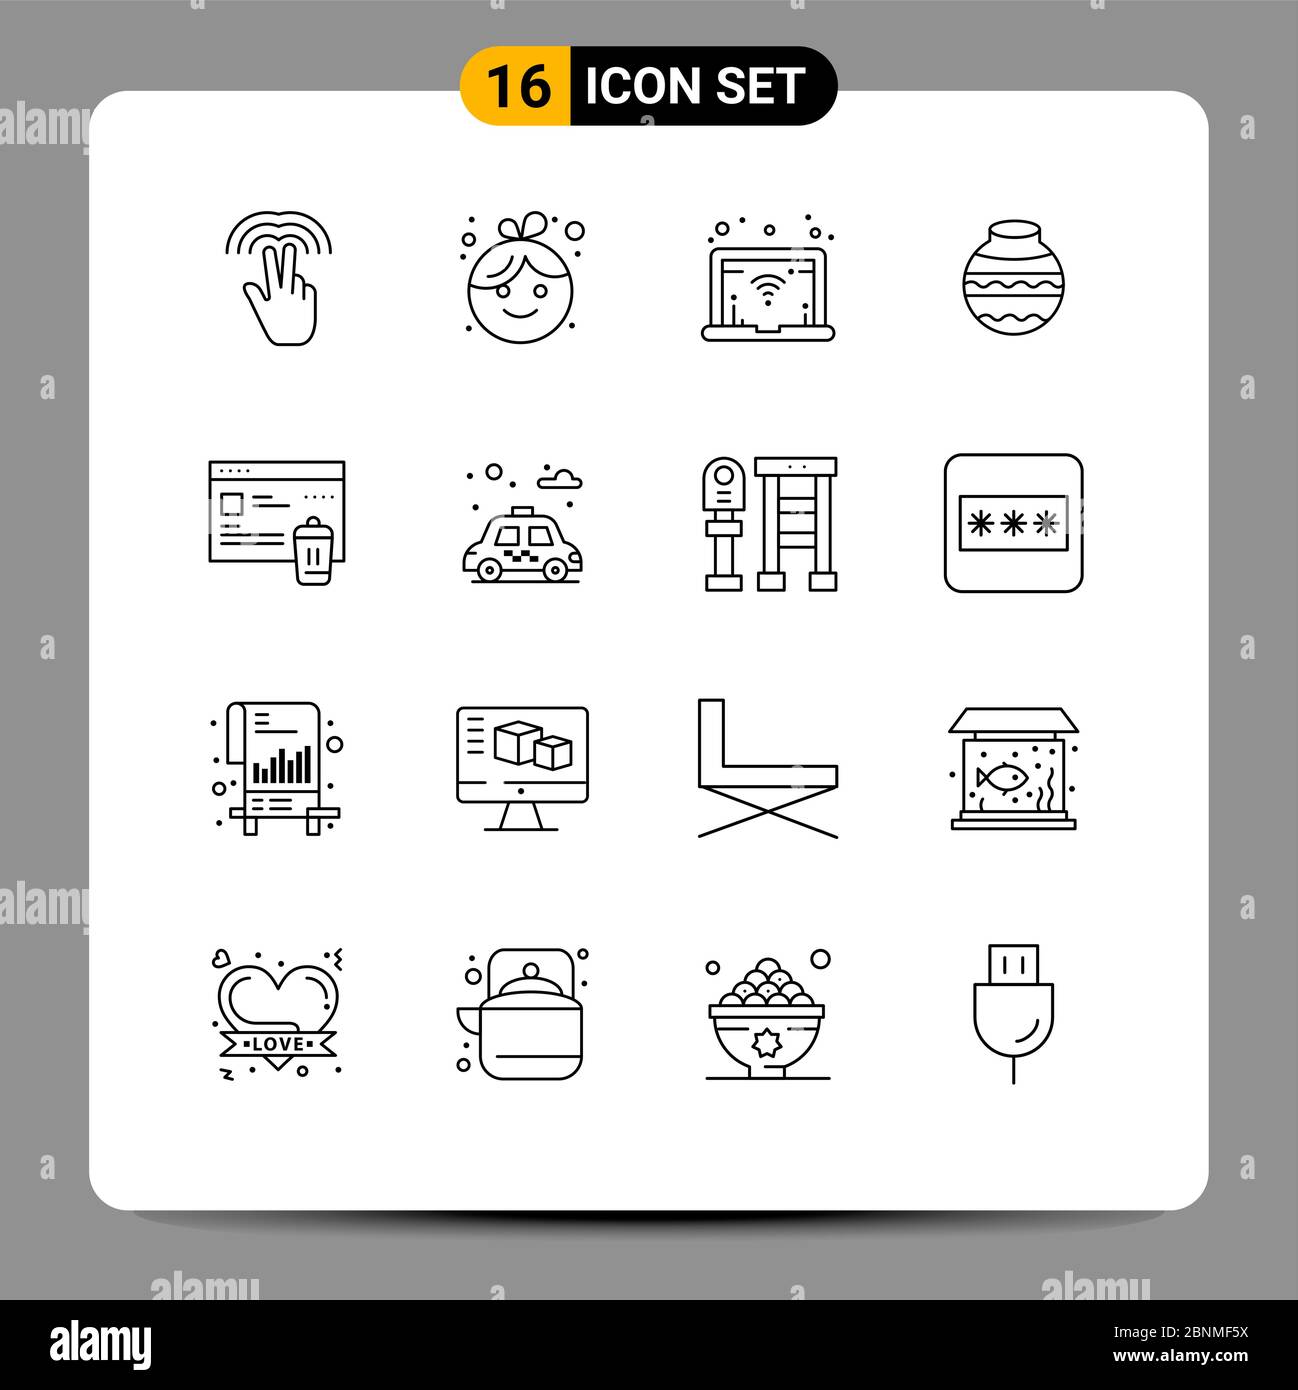 Mobile Interface Outline Set of 16 Pictograms of been, gdpr, network, festival, water Editable Vector Design Elements Stock Vector